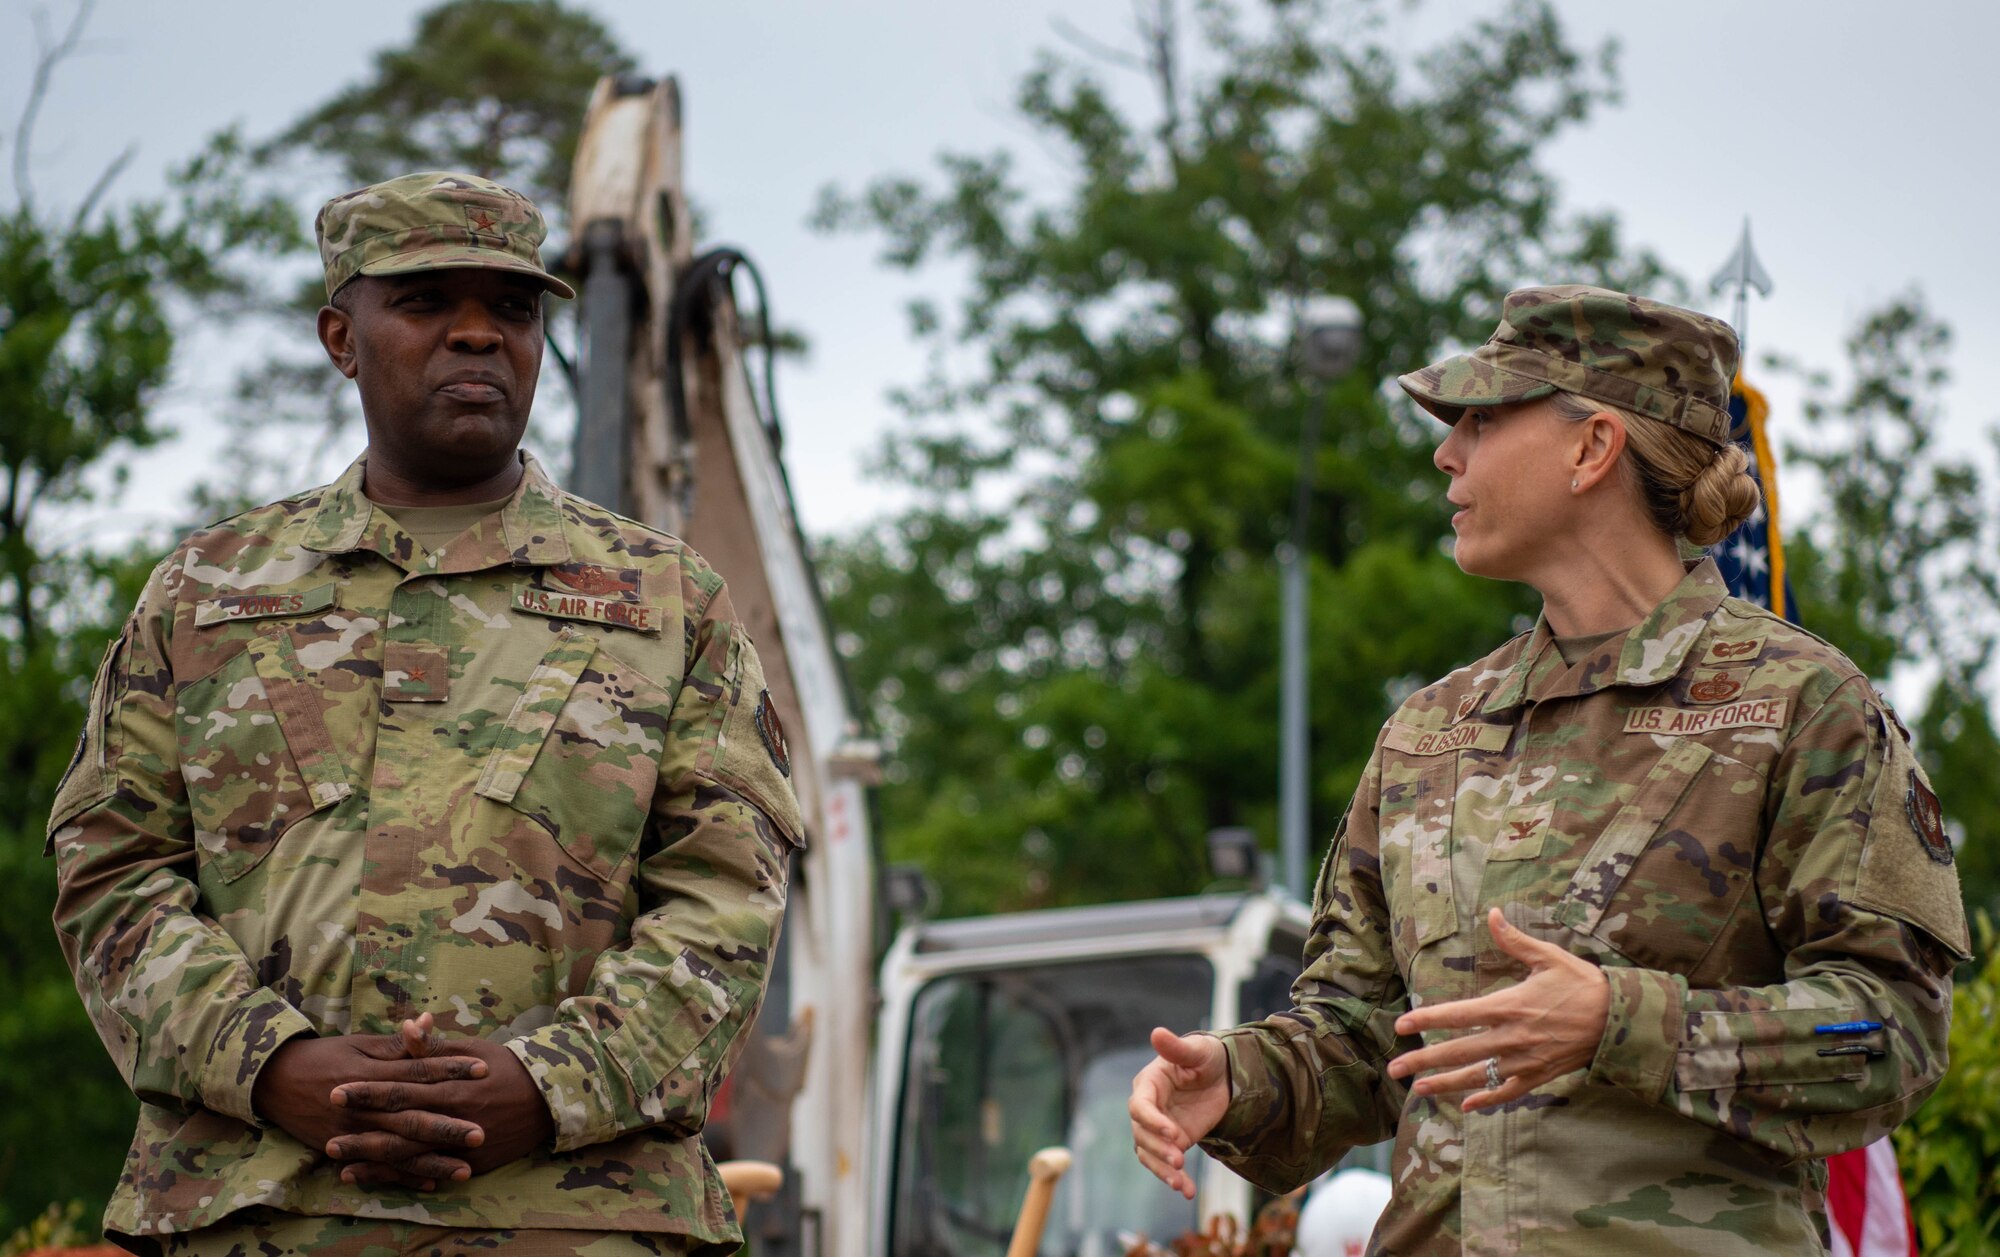 U.S. Air Force Col. Amy Glisson, 86th Mission Support Group commander, right, and Brig. Gen. Otis C. Jones, 86th Airlift Wing commander, left, speak about the new Gateway to Europe traffic circle monument at Ramstein Air Base, Germany, Aug. 15, 2022.